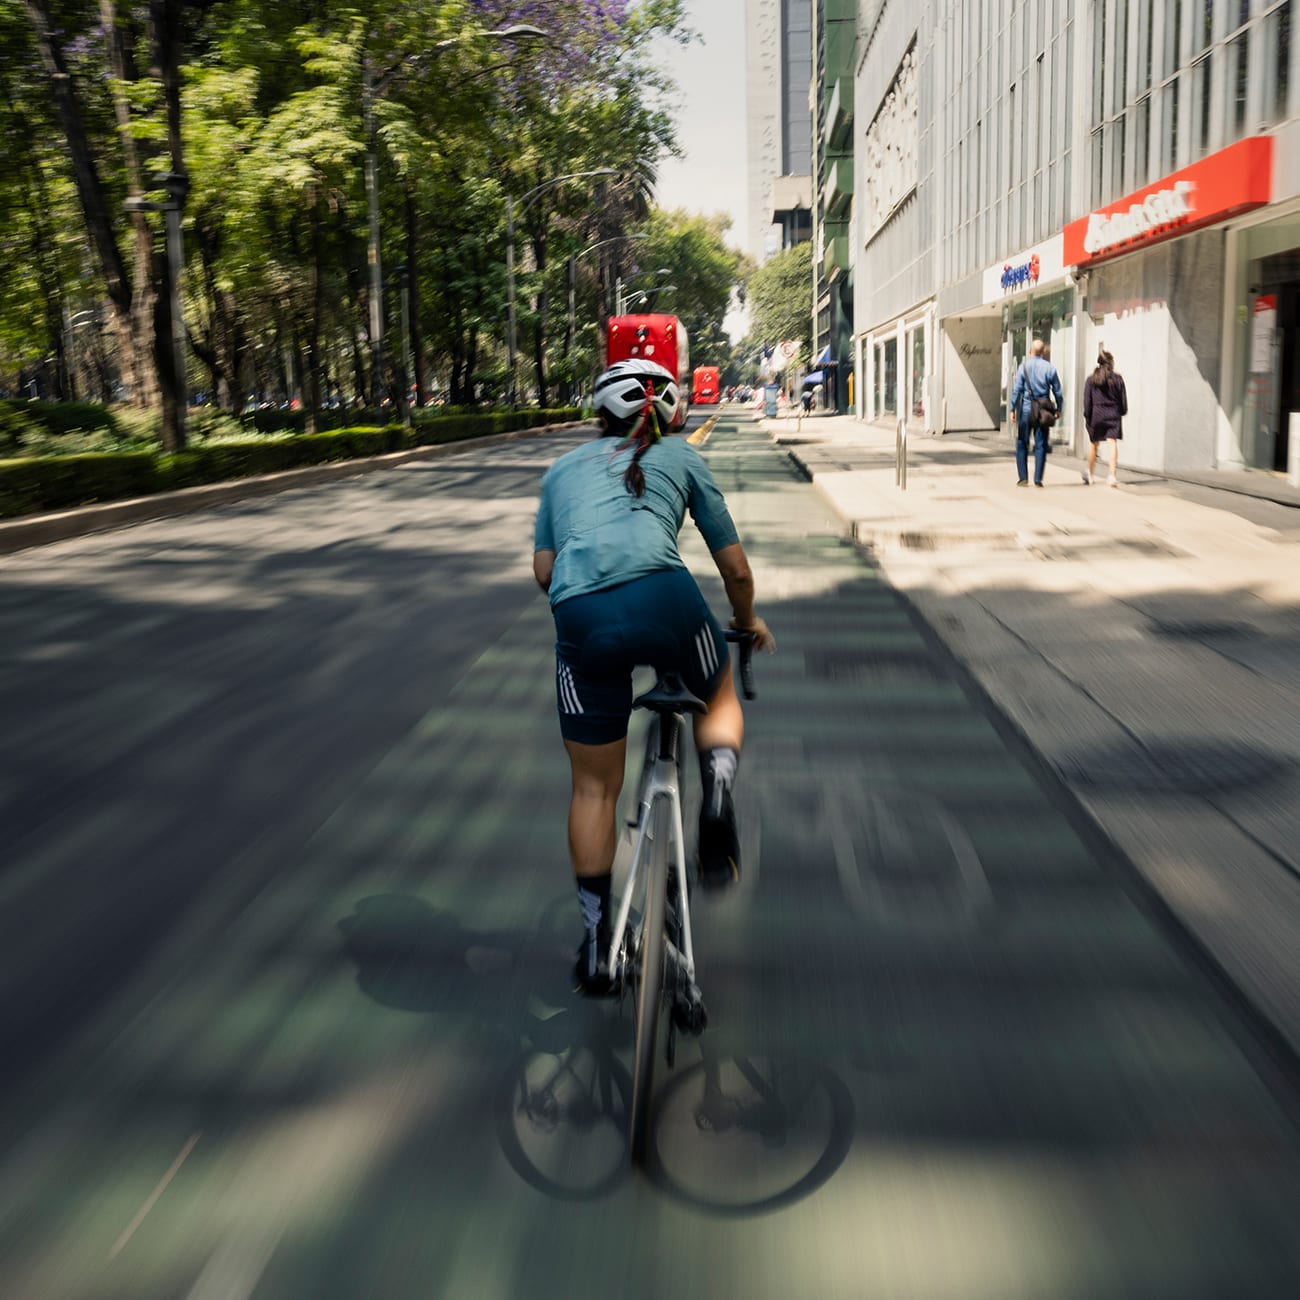 A woman cycles through the street of Mexico City at a fast pace